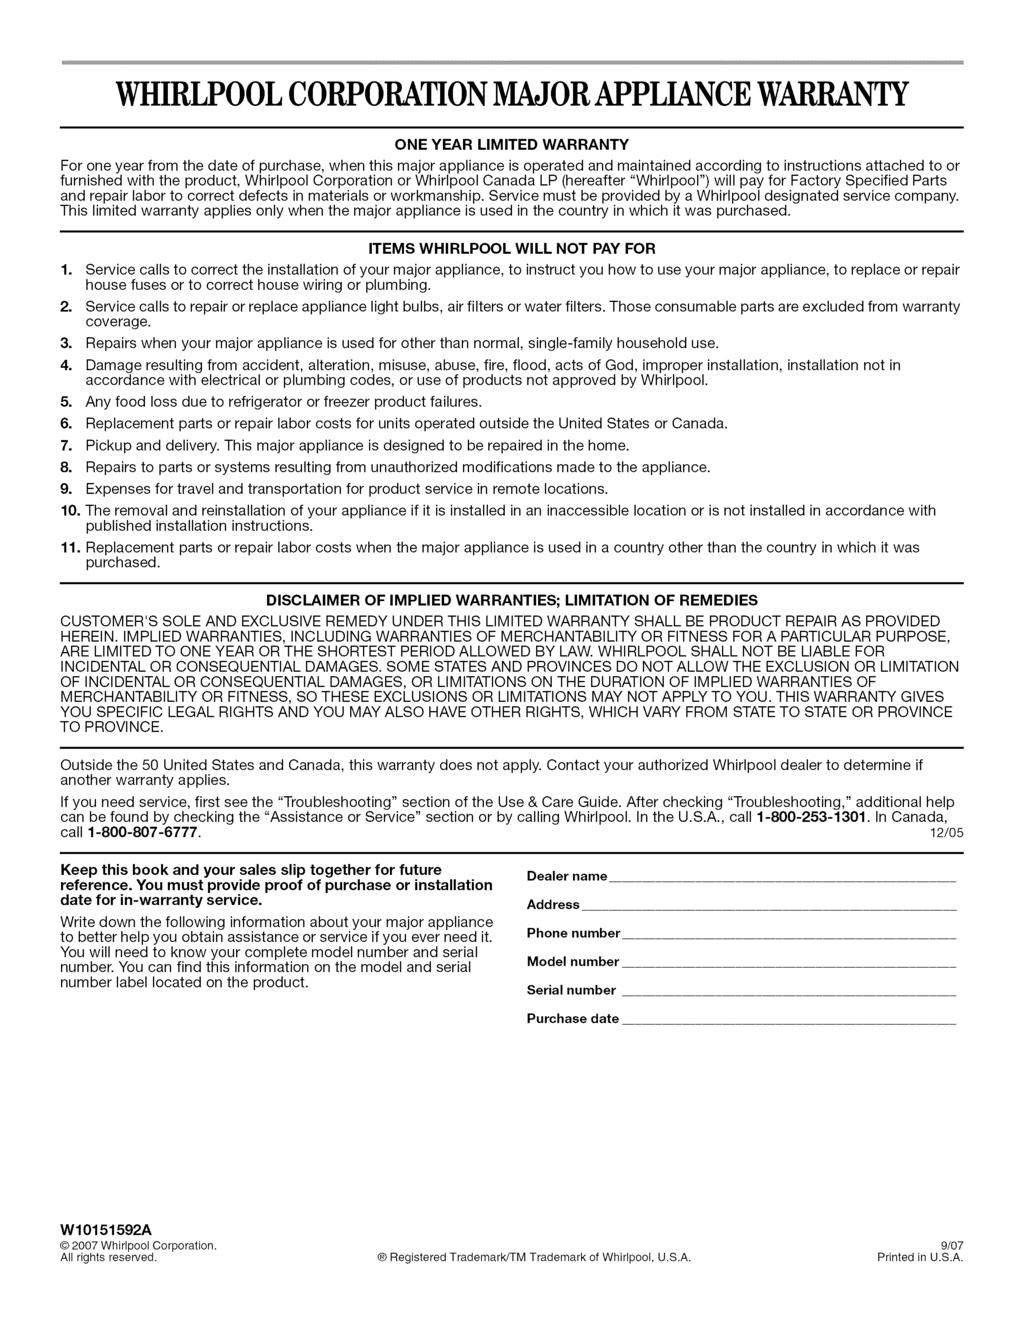 WHIRLPOOLCORPORATIONMAJORAPPLIANCEWARRANTY ONE YEAR LIMITED WARRANTY For one year from the date of purchase, when this major appliance is operated and maintained according to instructions attached to